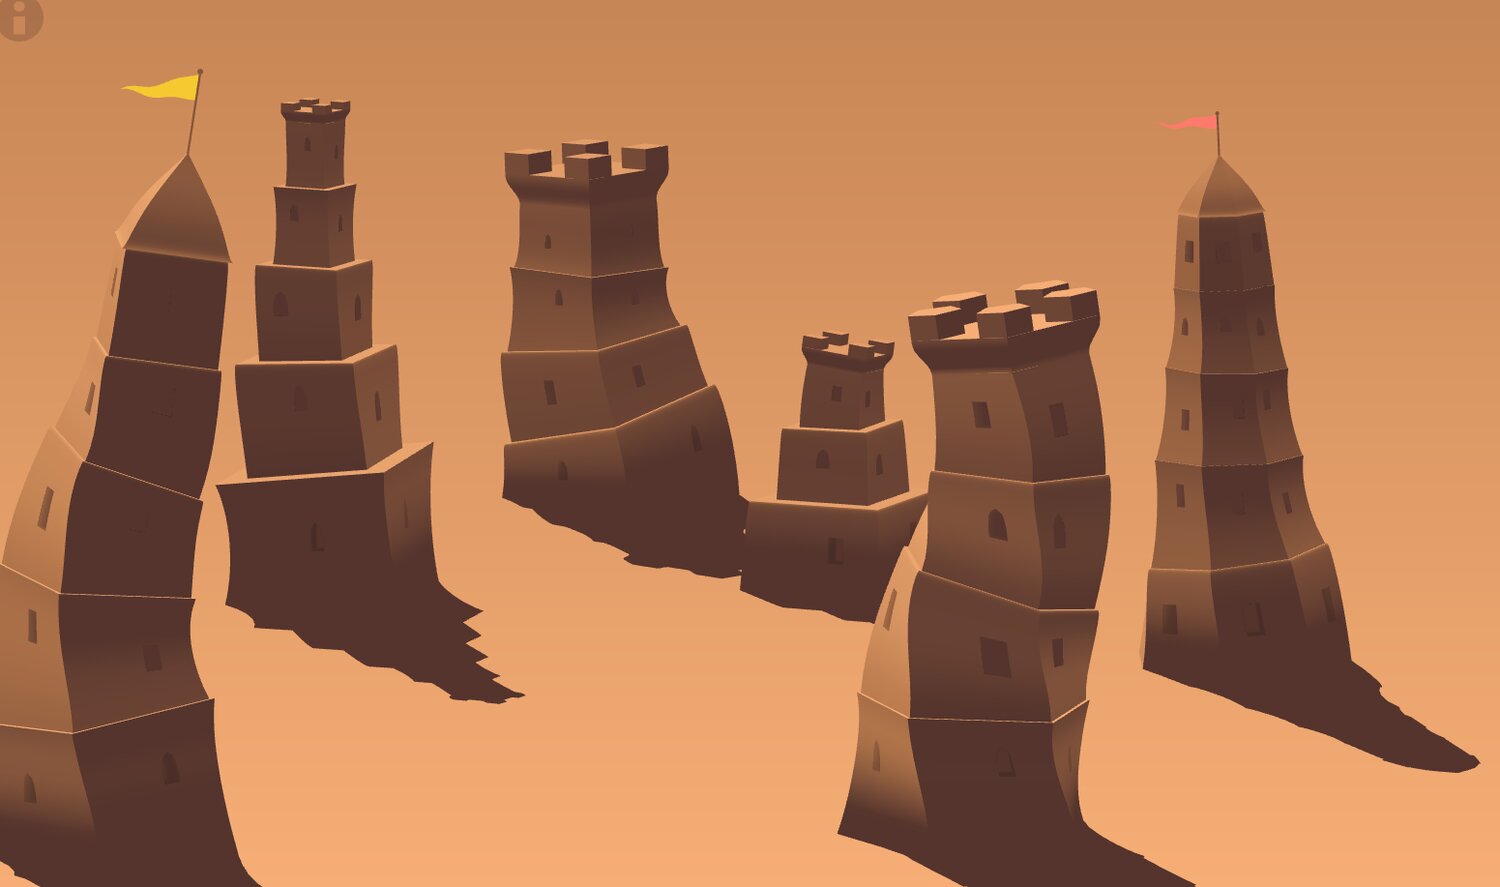 Vectorpark’s Sandcastles is exactly what it sounds like – a sandcastle generator. Build as many as you can before the sea comes in to wash them away.